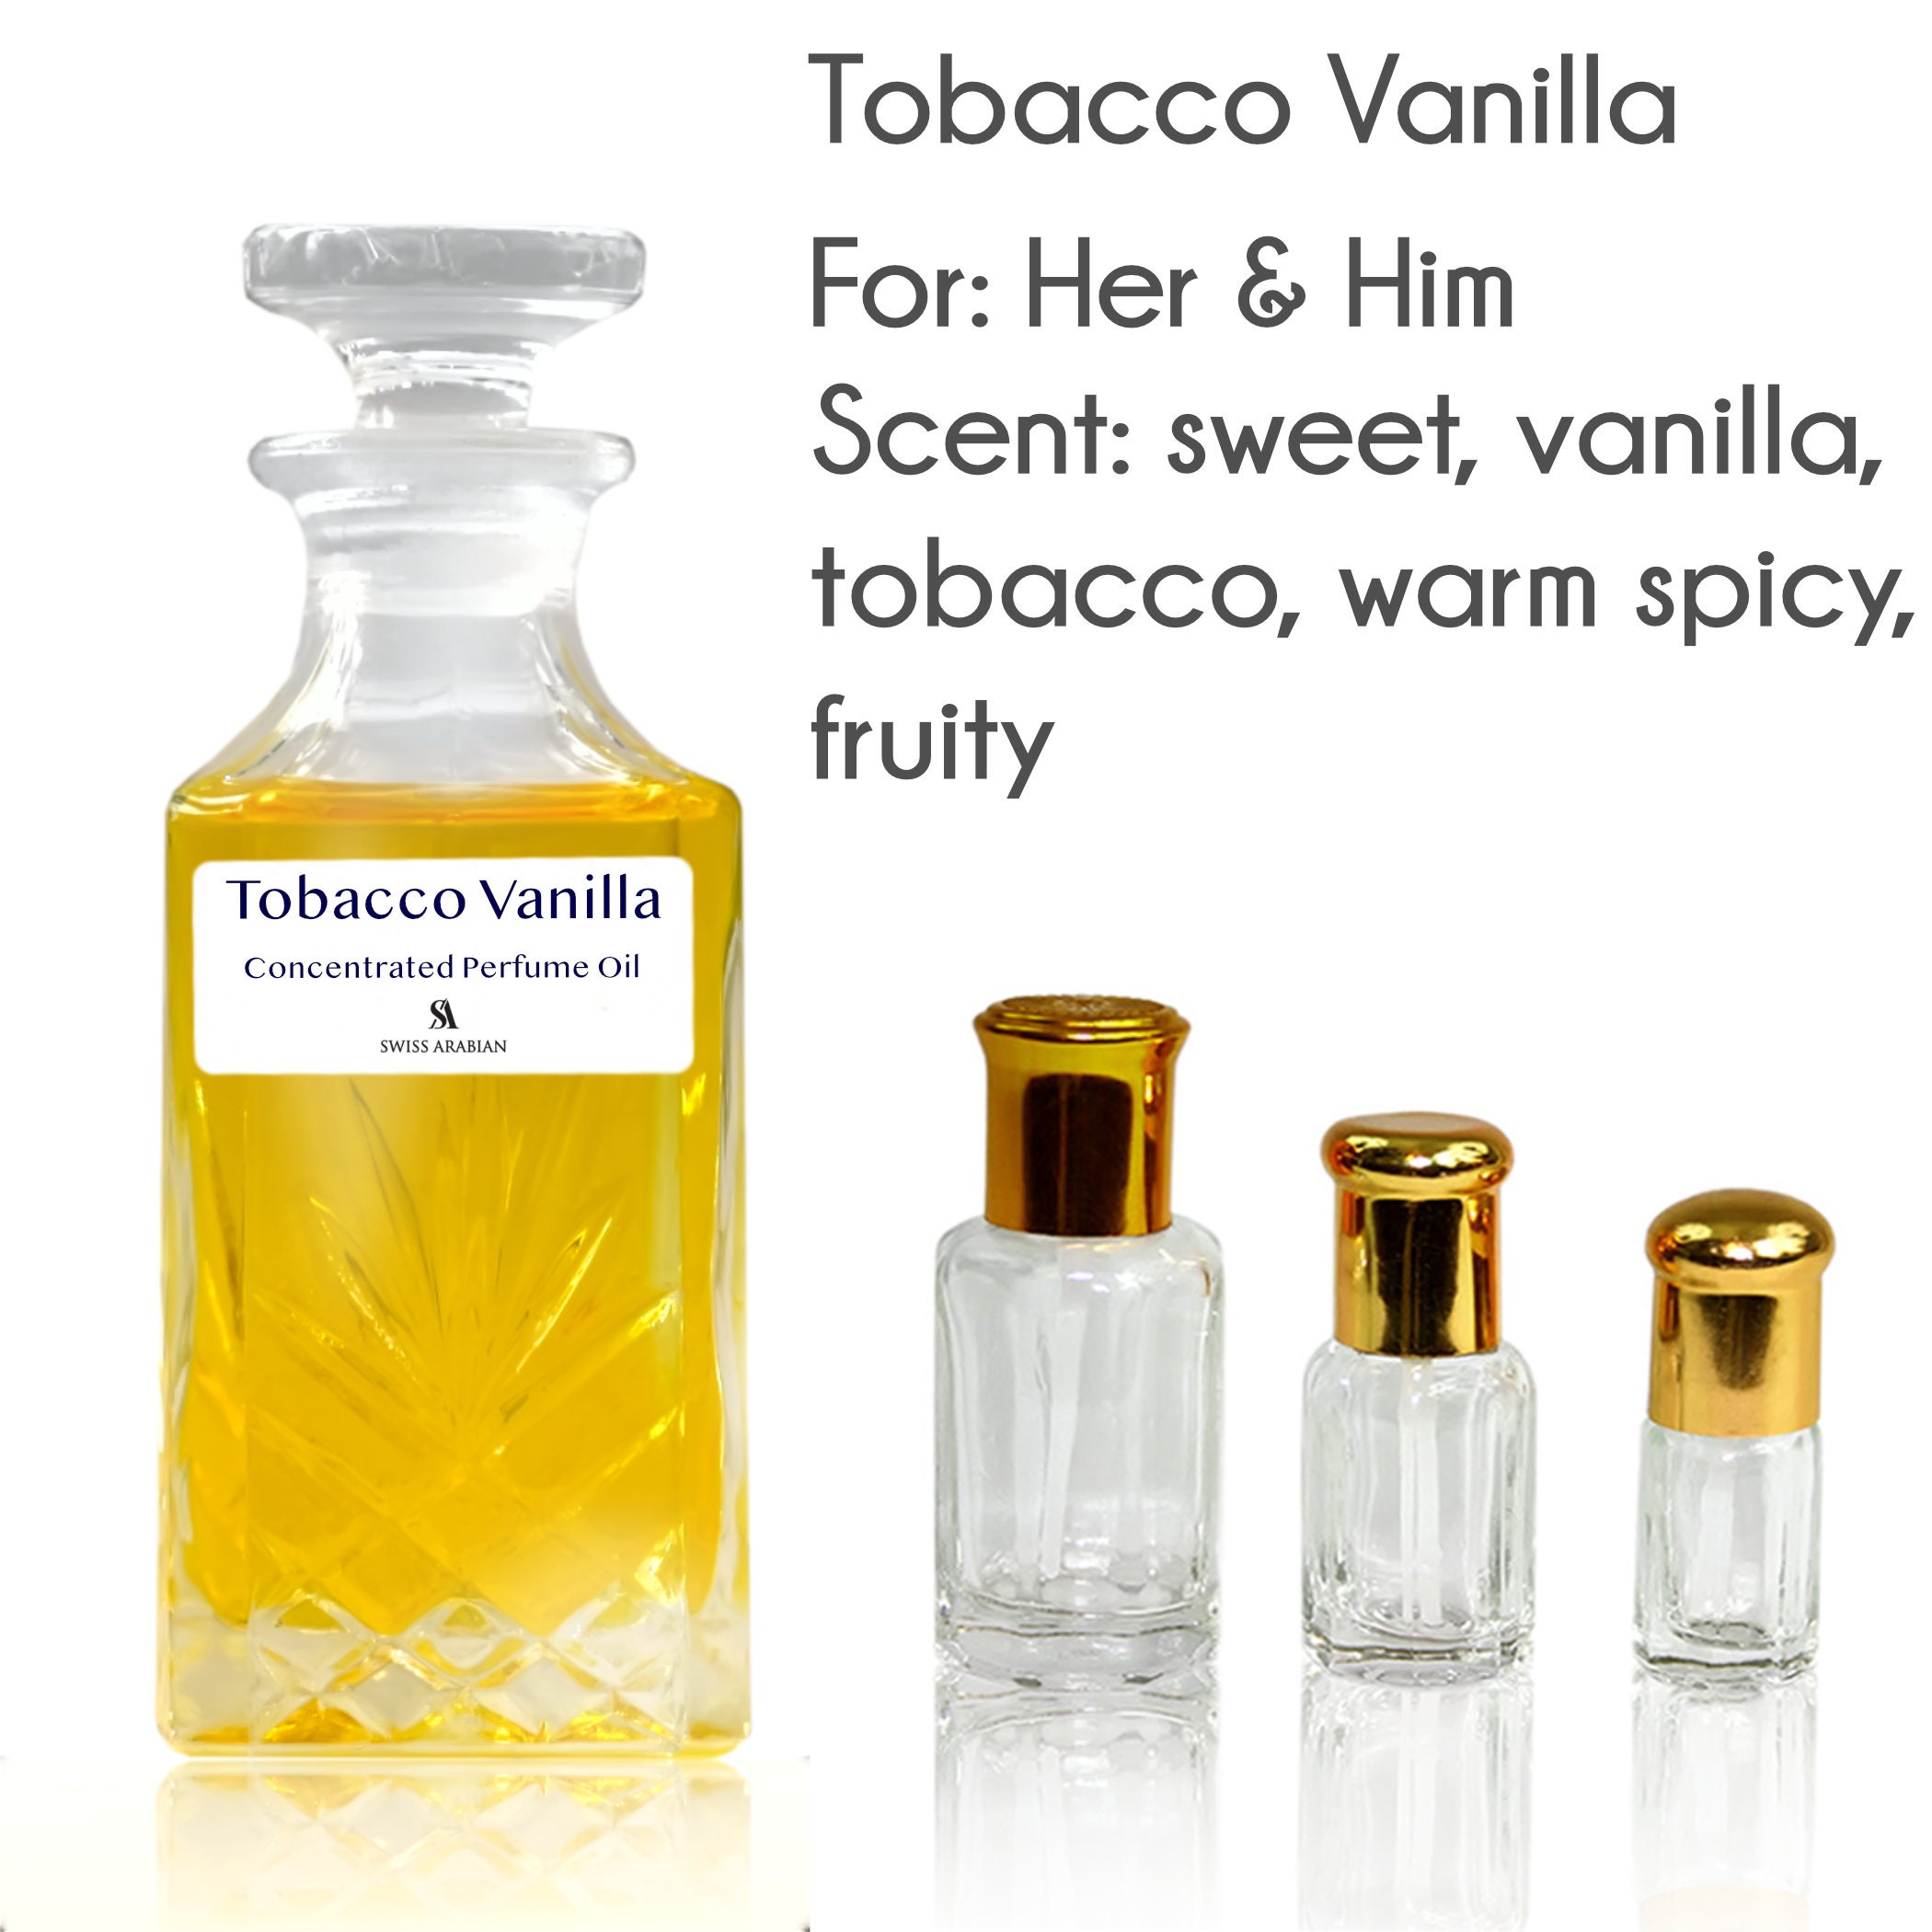  Concentrated Fragrance Oil - Scent - Vanilla Musk: an